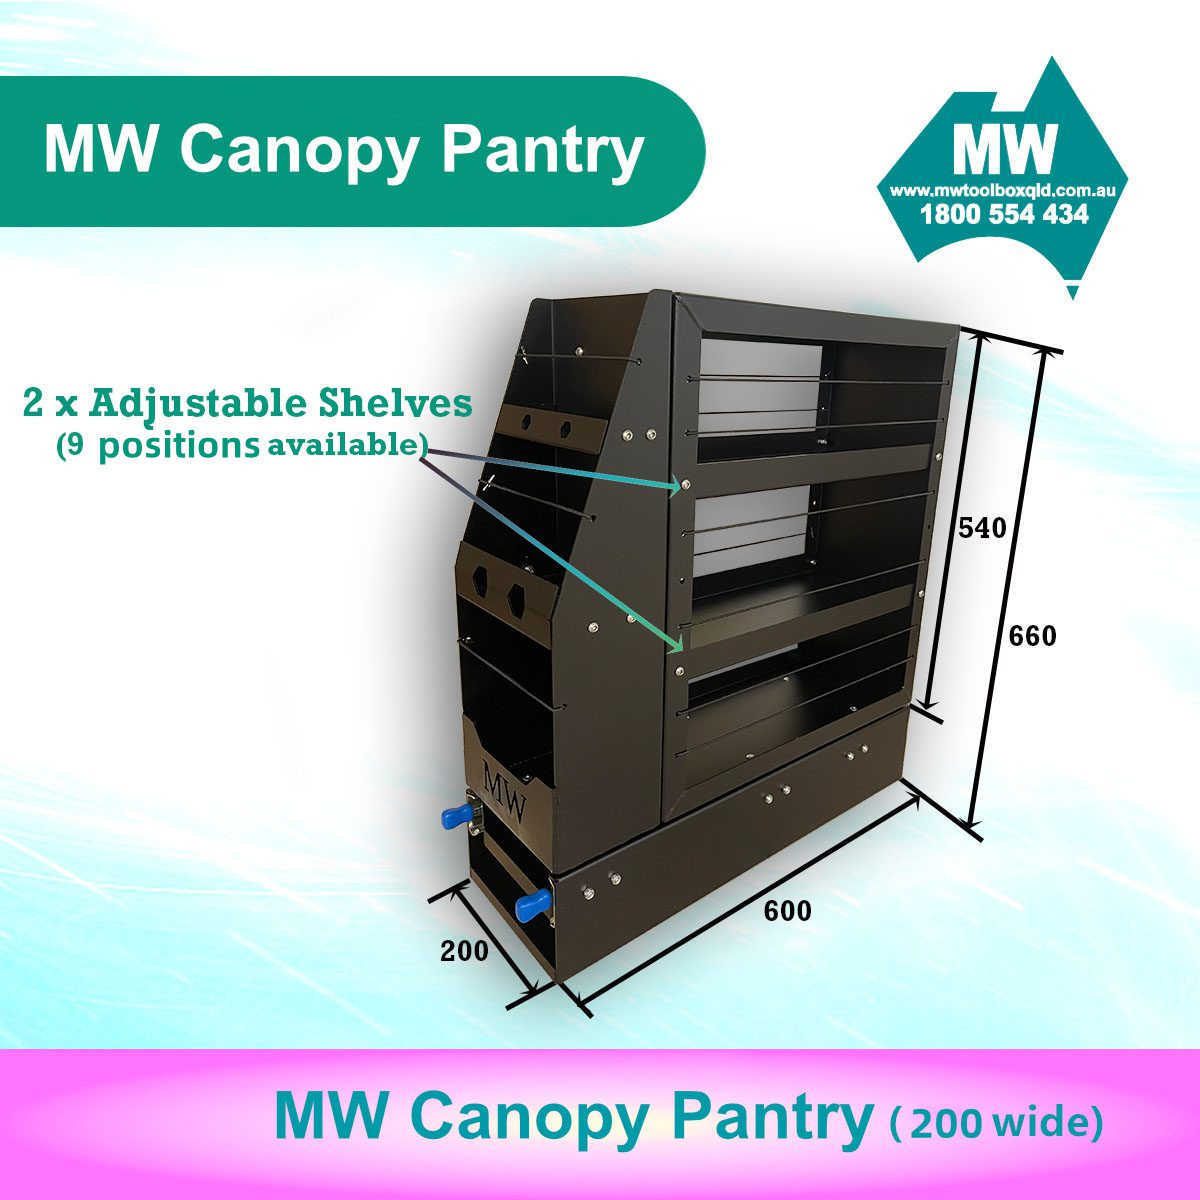 Canopy-Pantry-300mm-Wide-Canopy-Drawer-3-1-1